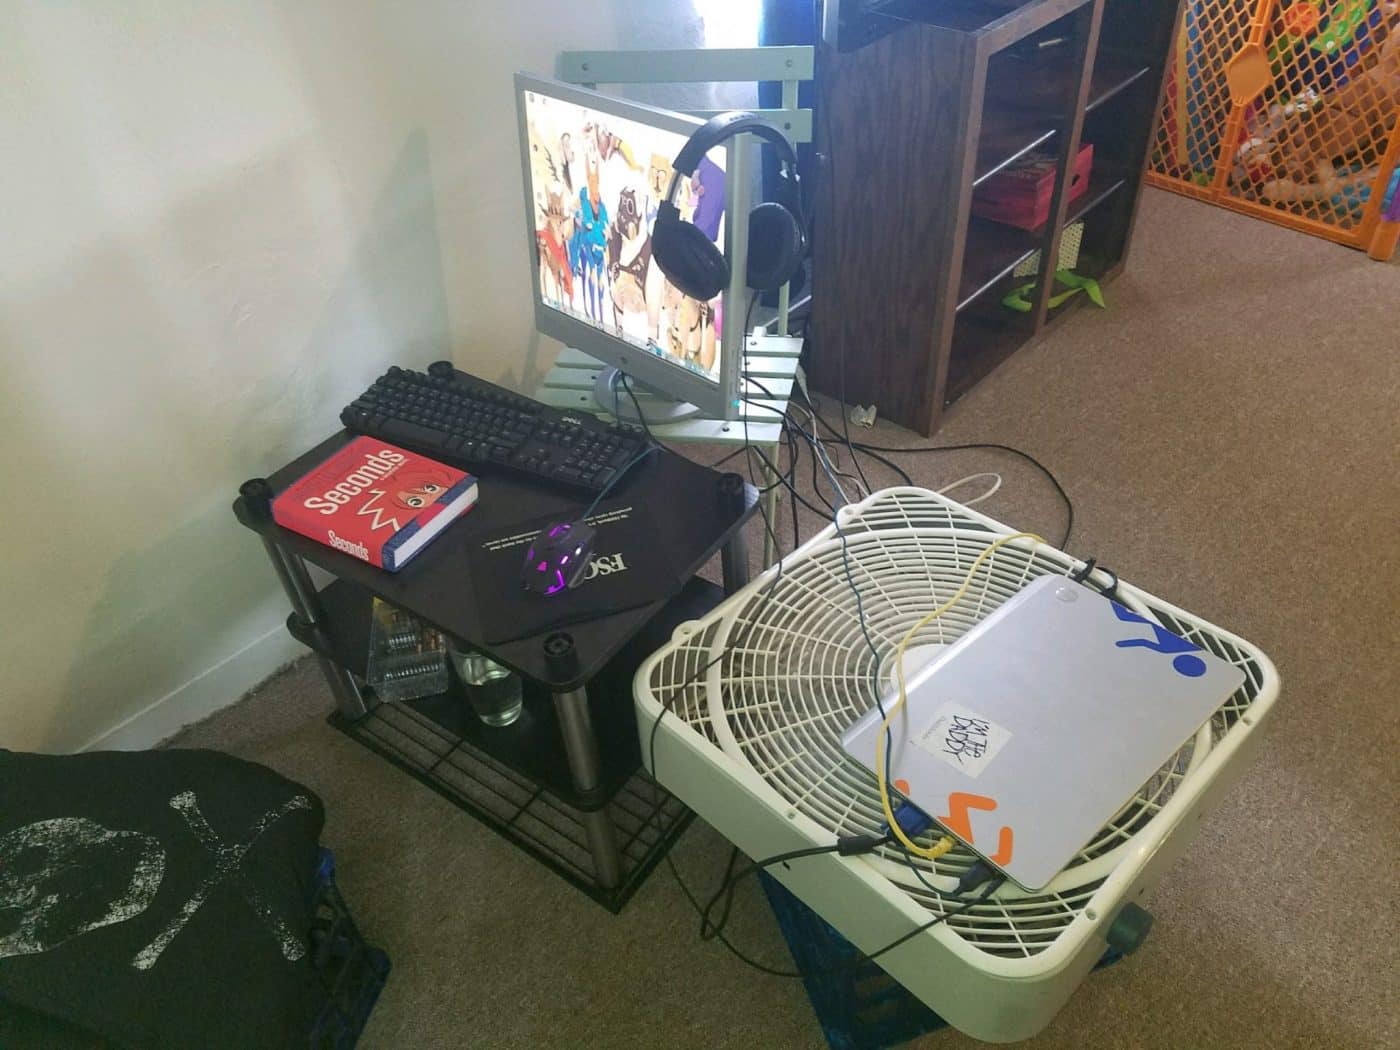 With a box fan air cooling setup, tiny monitor, keyboard on a small table, and and uncomfortable chair with no support, this gamer is headed for the "my back hurts" hall of fame.